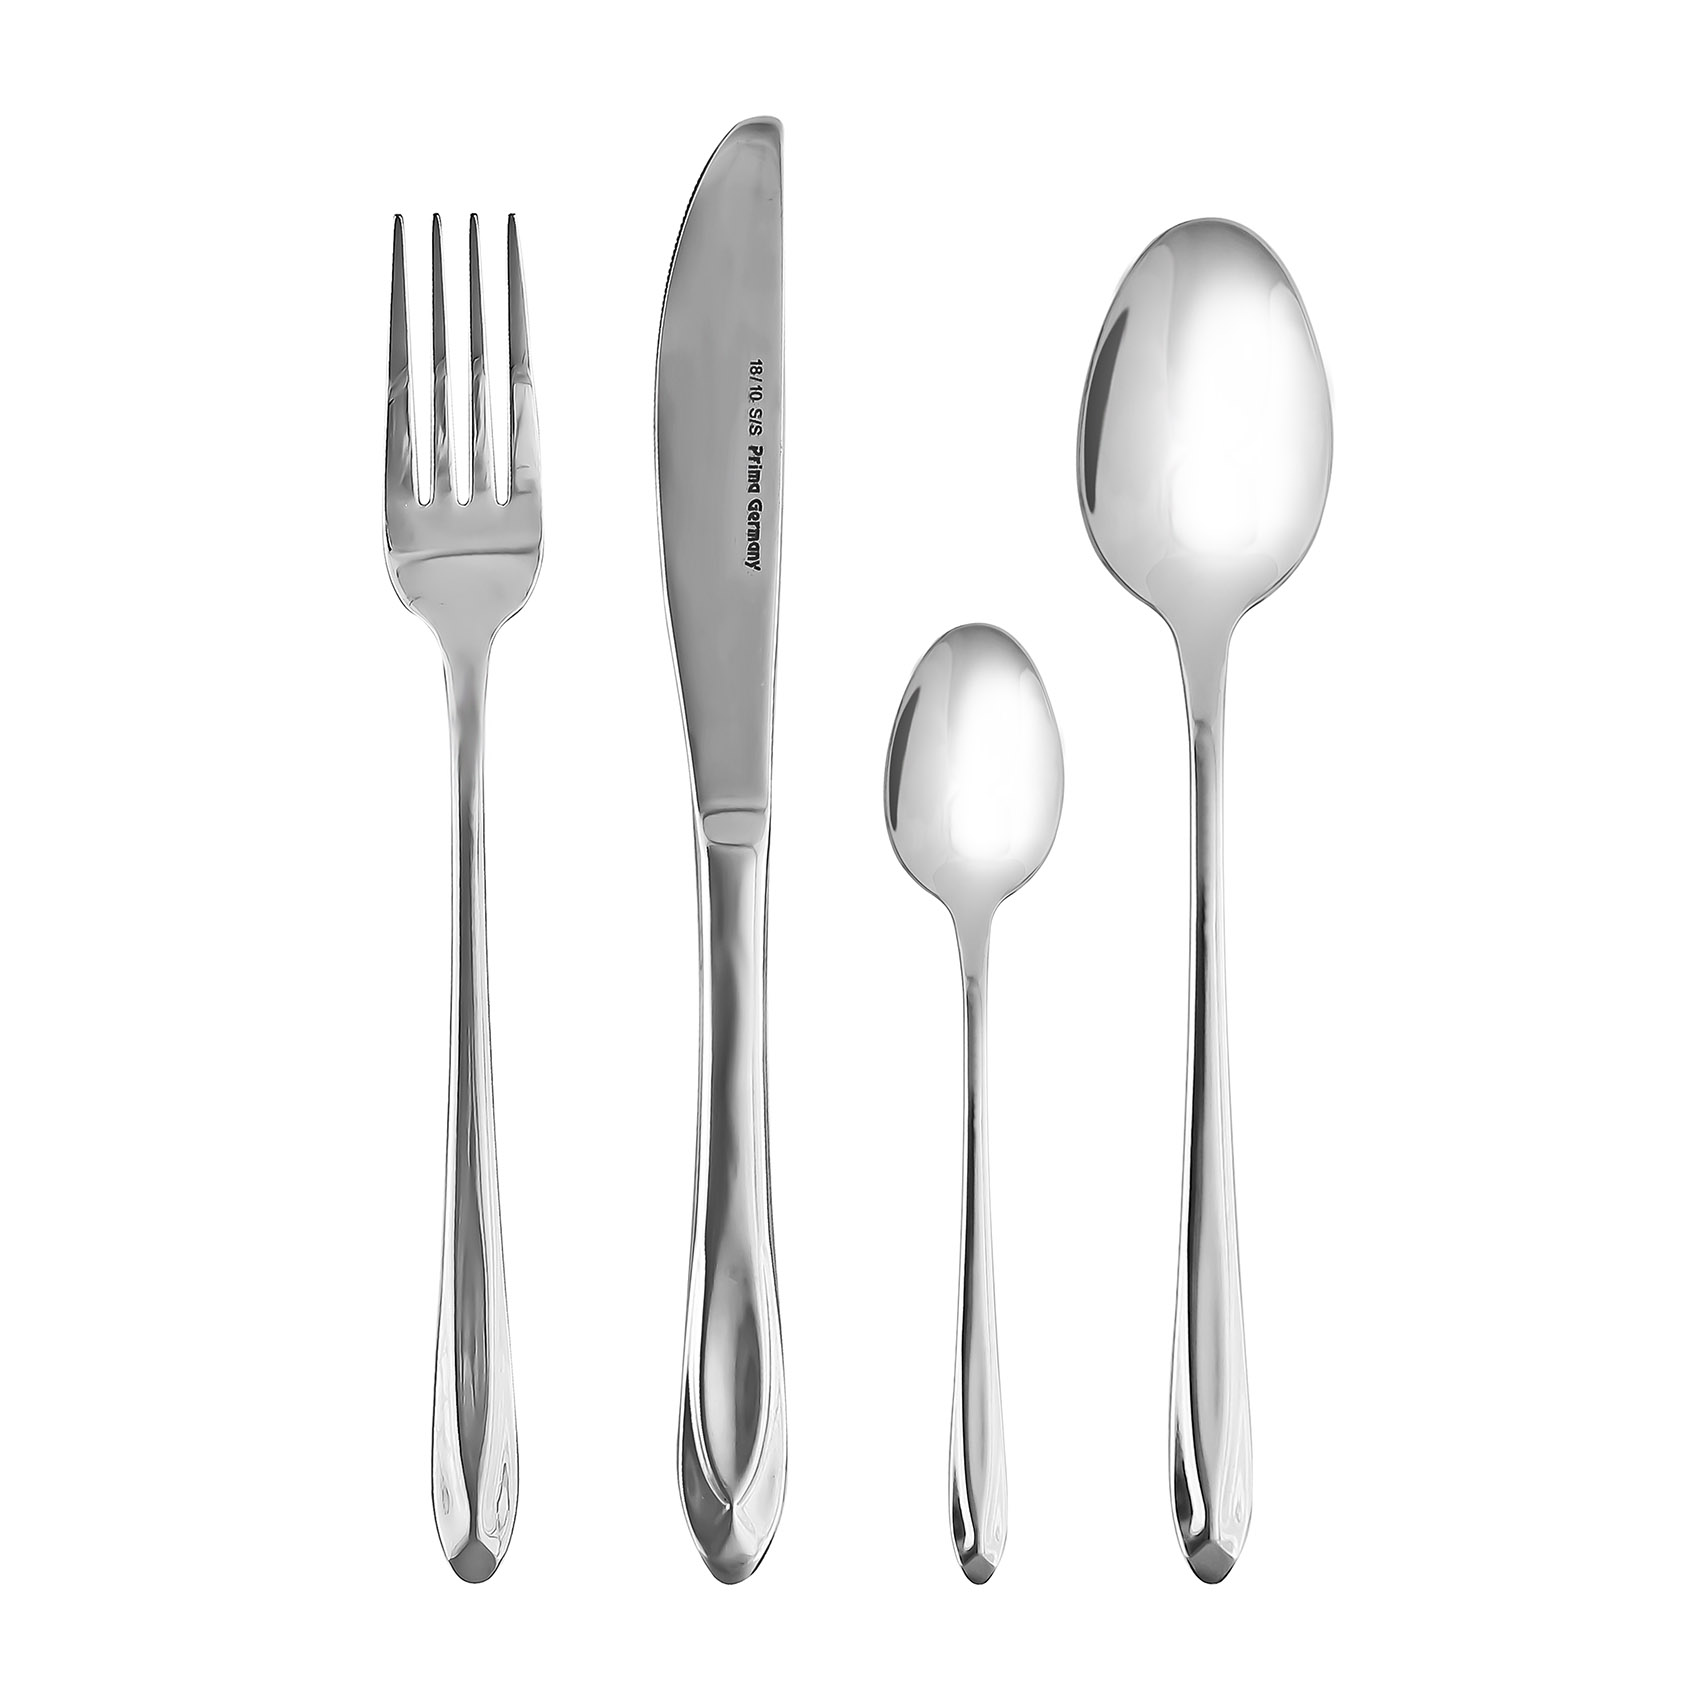 PRIMA 24 Pcs Cutlery Set High quality Stainless Steel Spoons | Forks | Knives